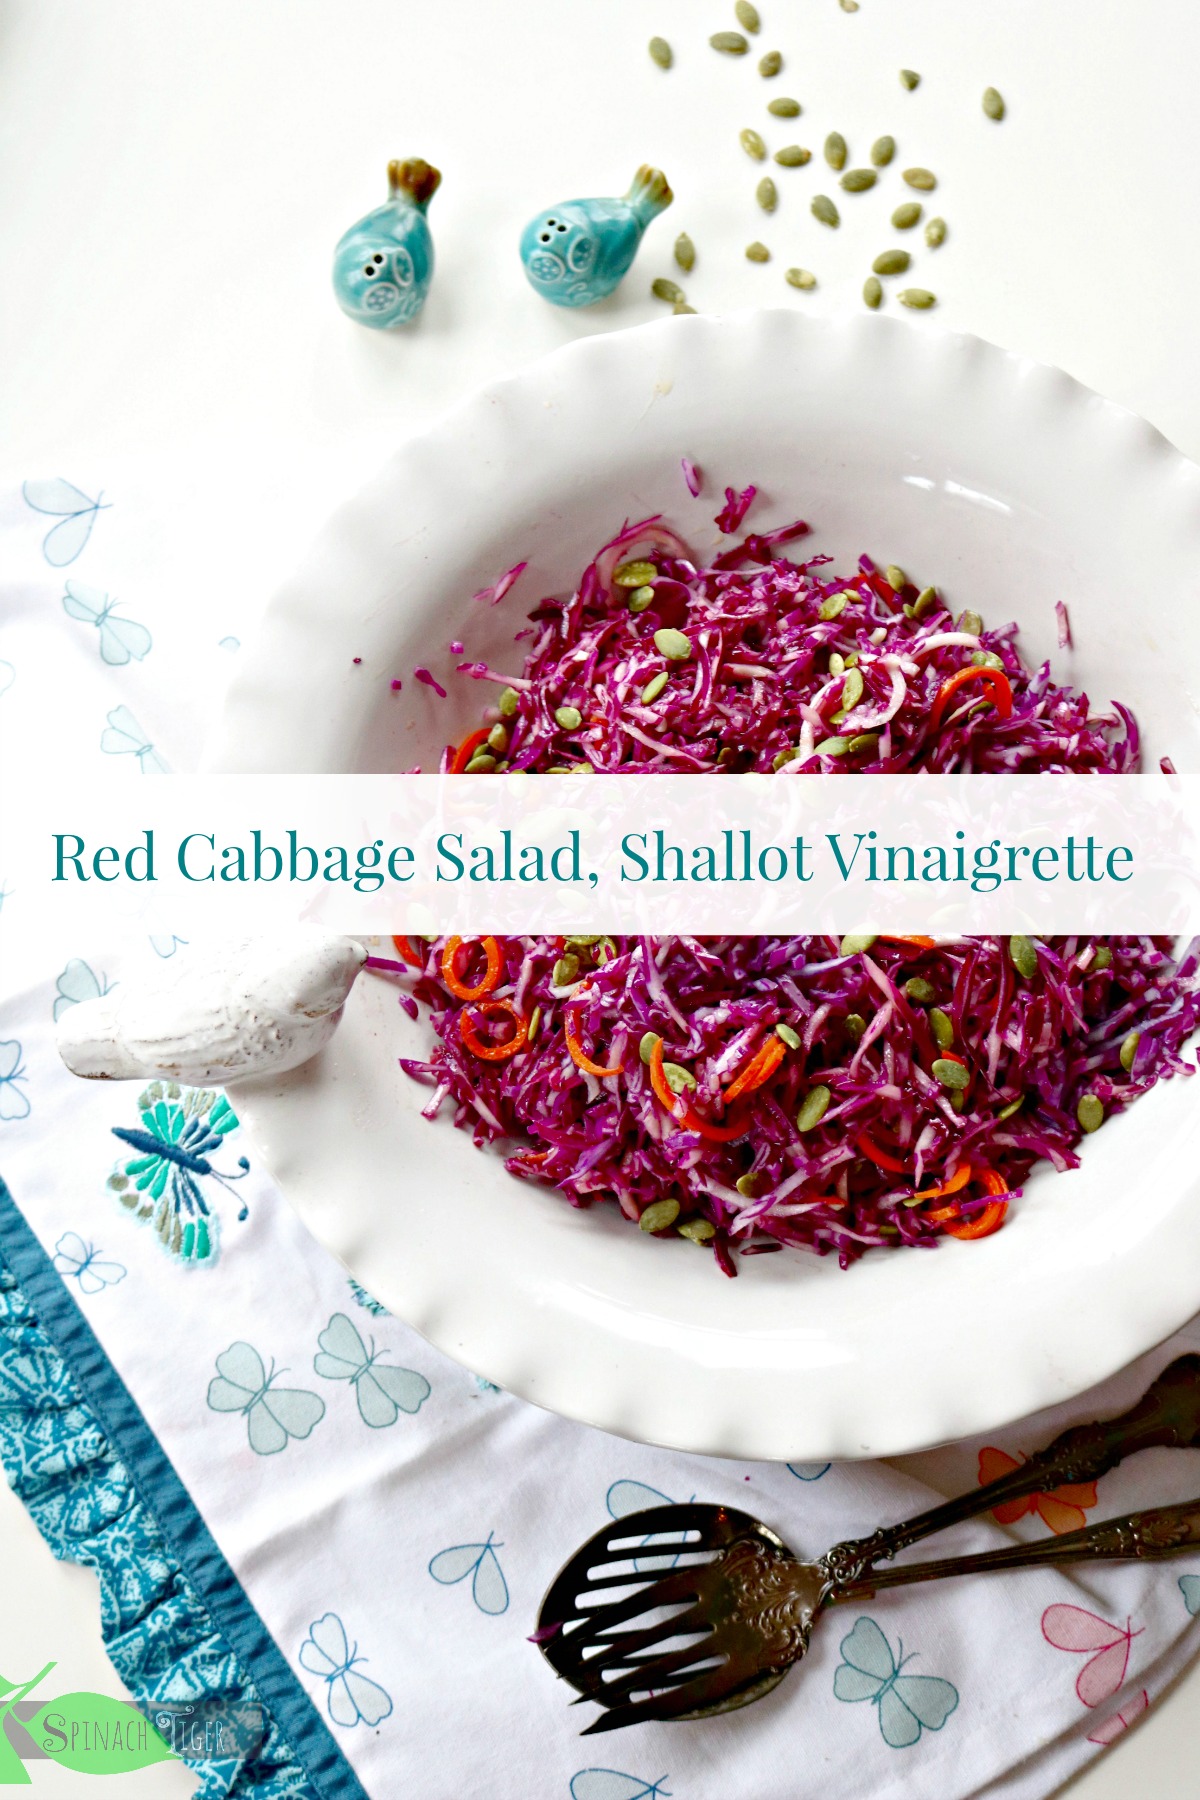 Red cabbage salad recipe with shallot vinaigrette from Spinach Tiger